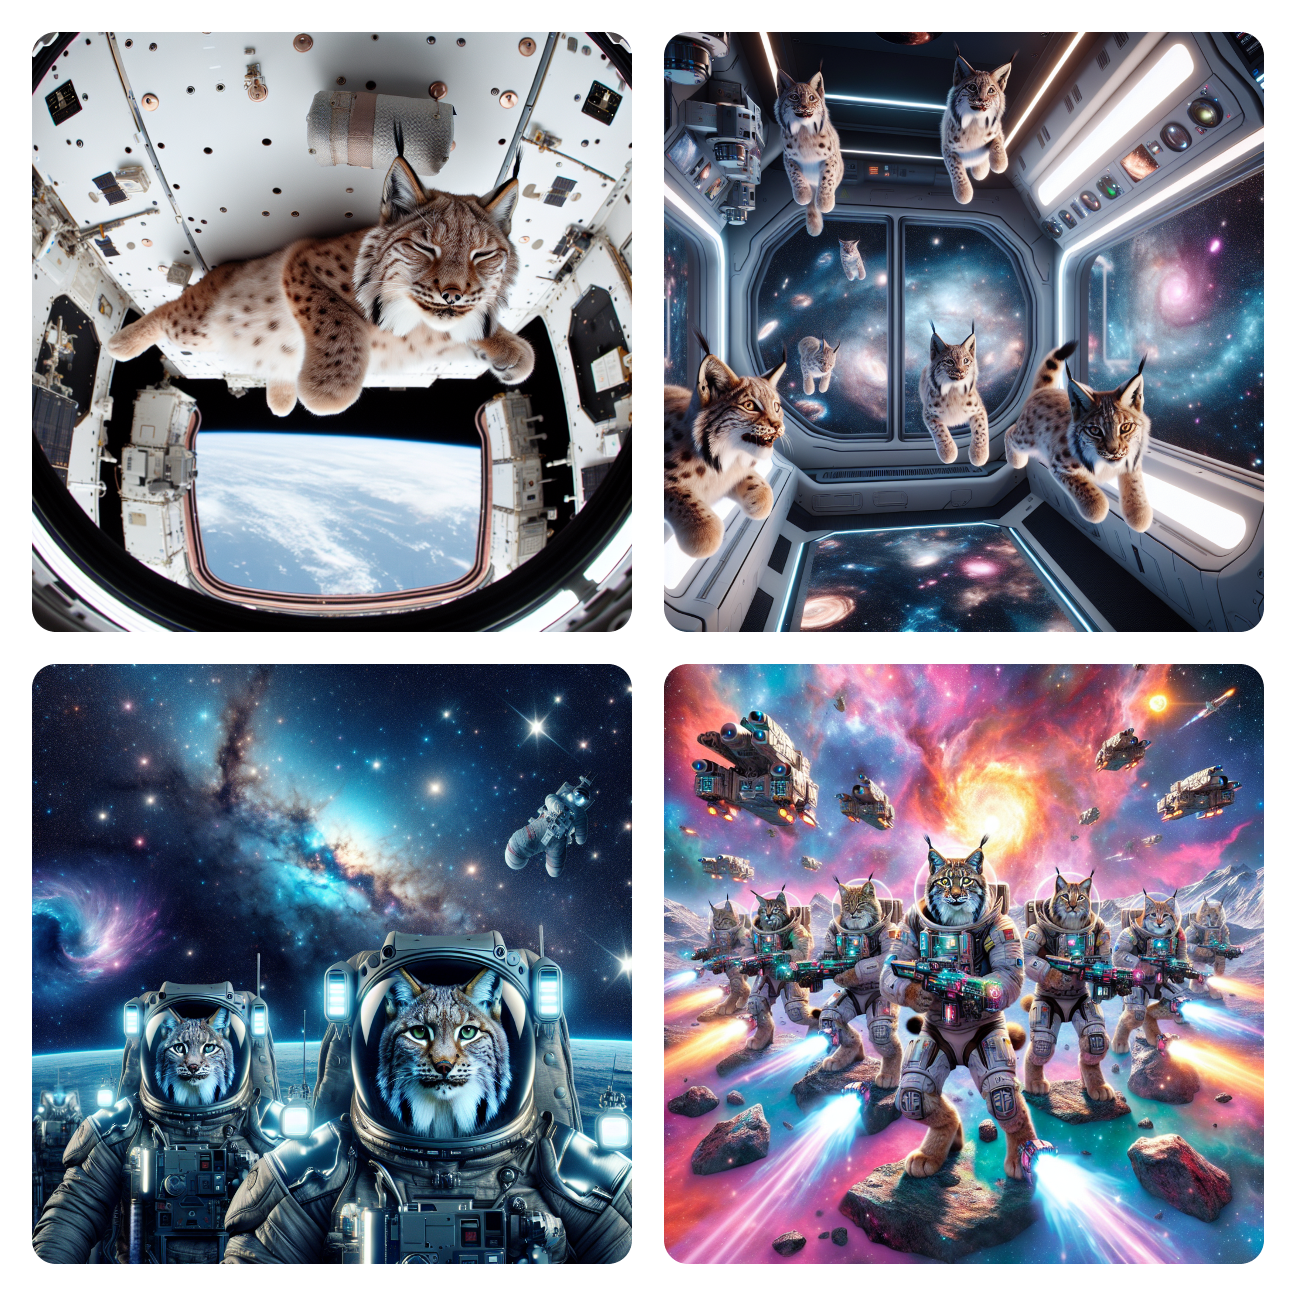 Image: Lynxes in Spaaace: The Furrin' Frontier!